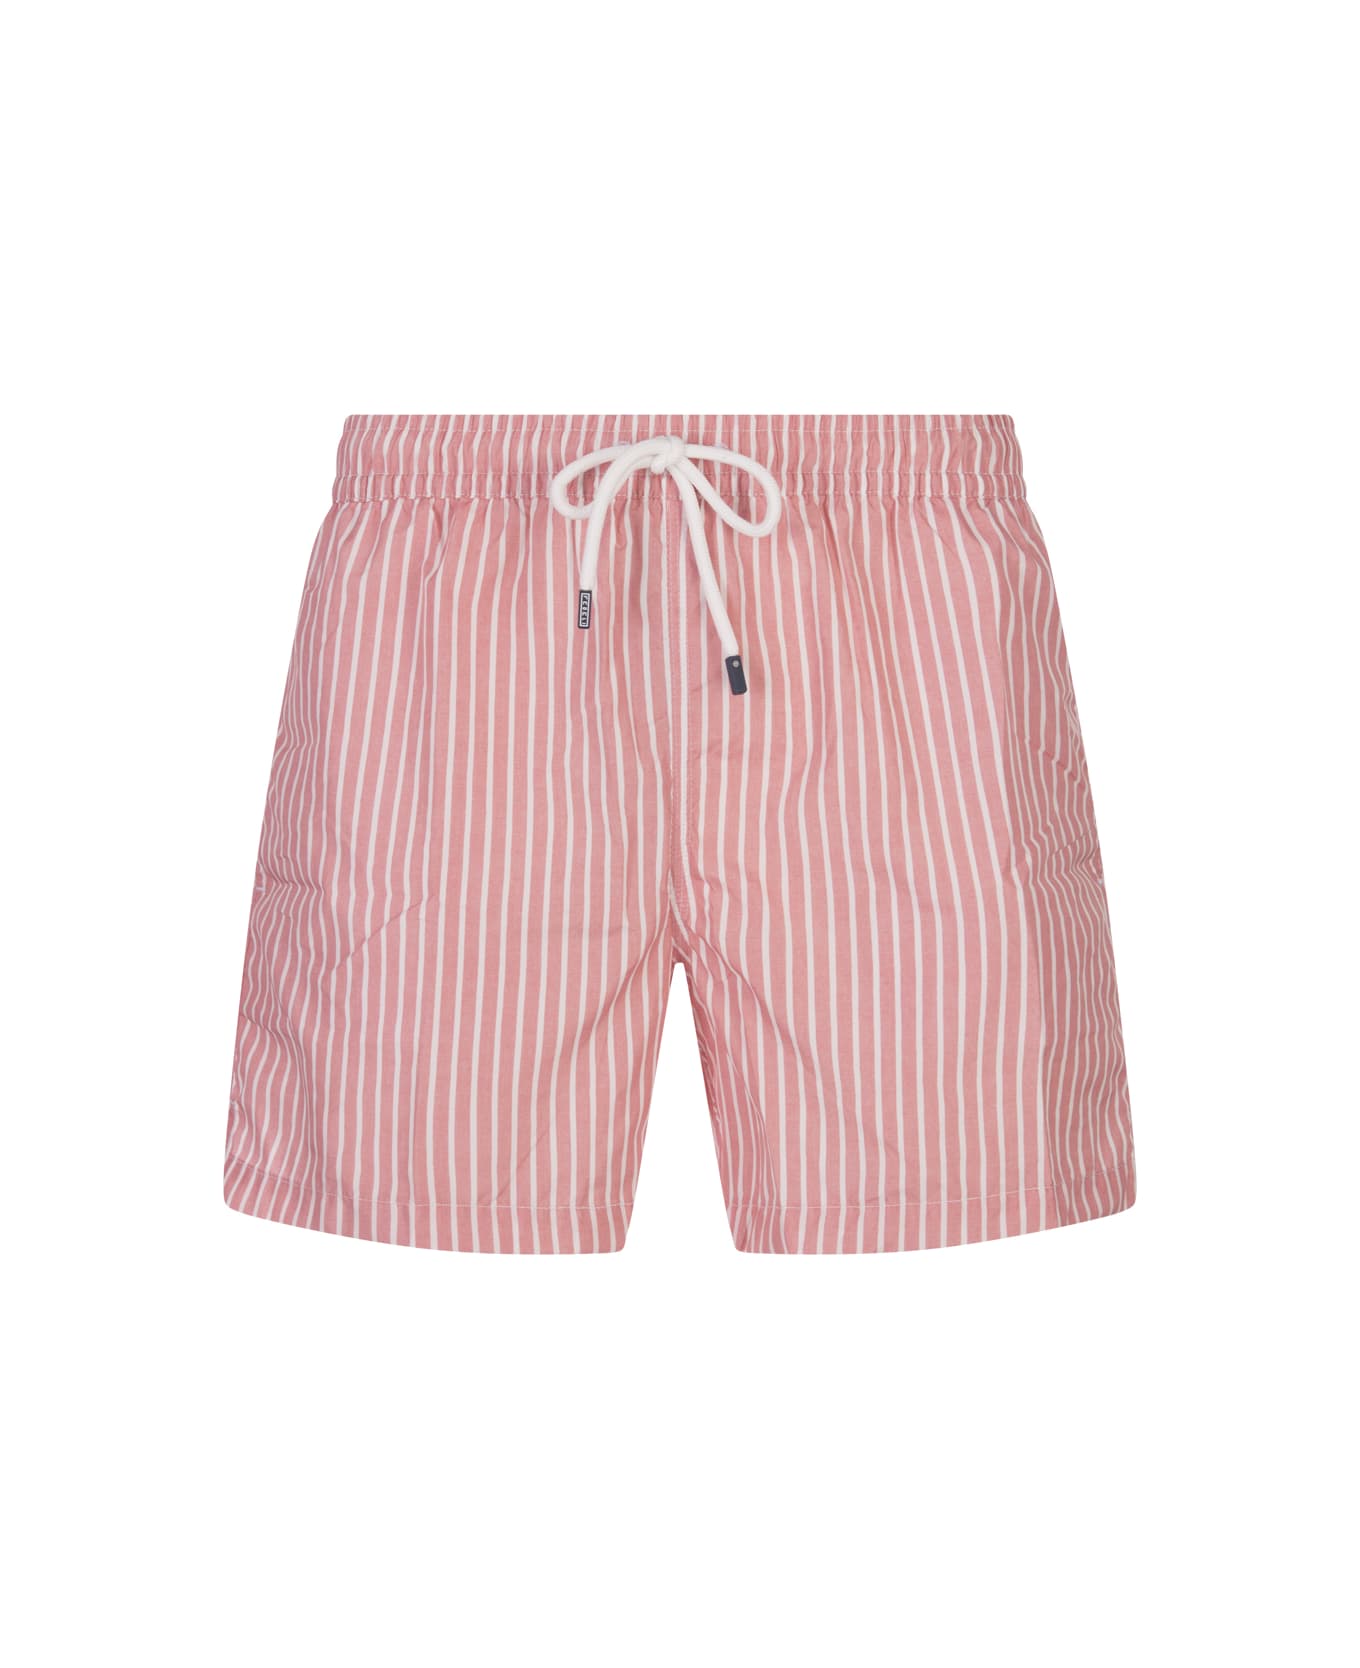 Fedeli Pink And White Striped Swim Shorts - Pink